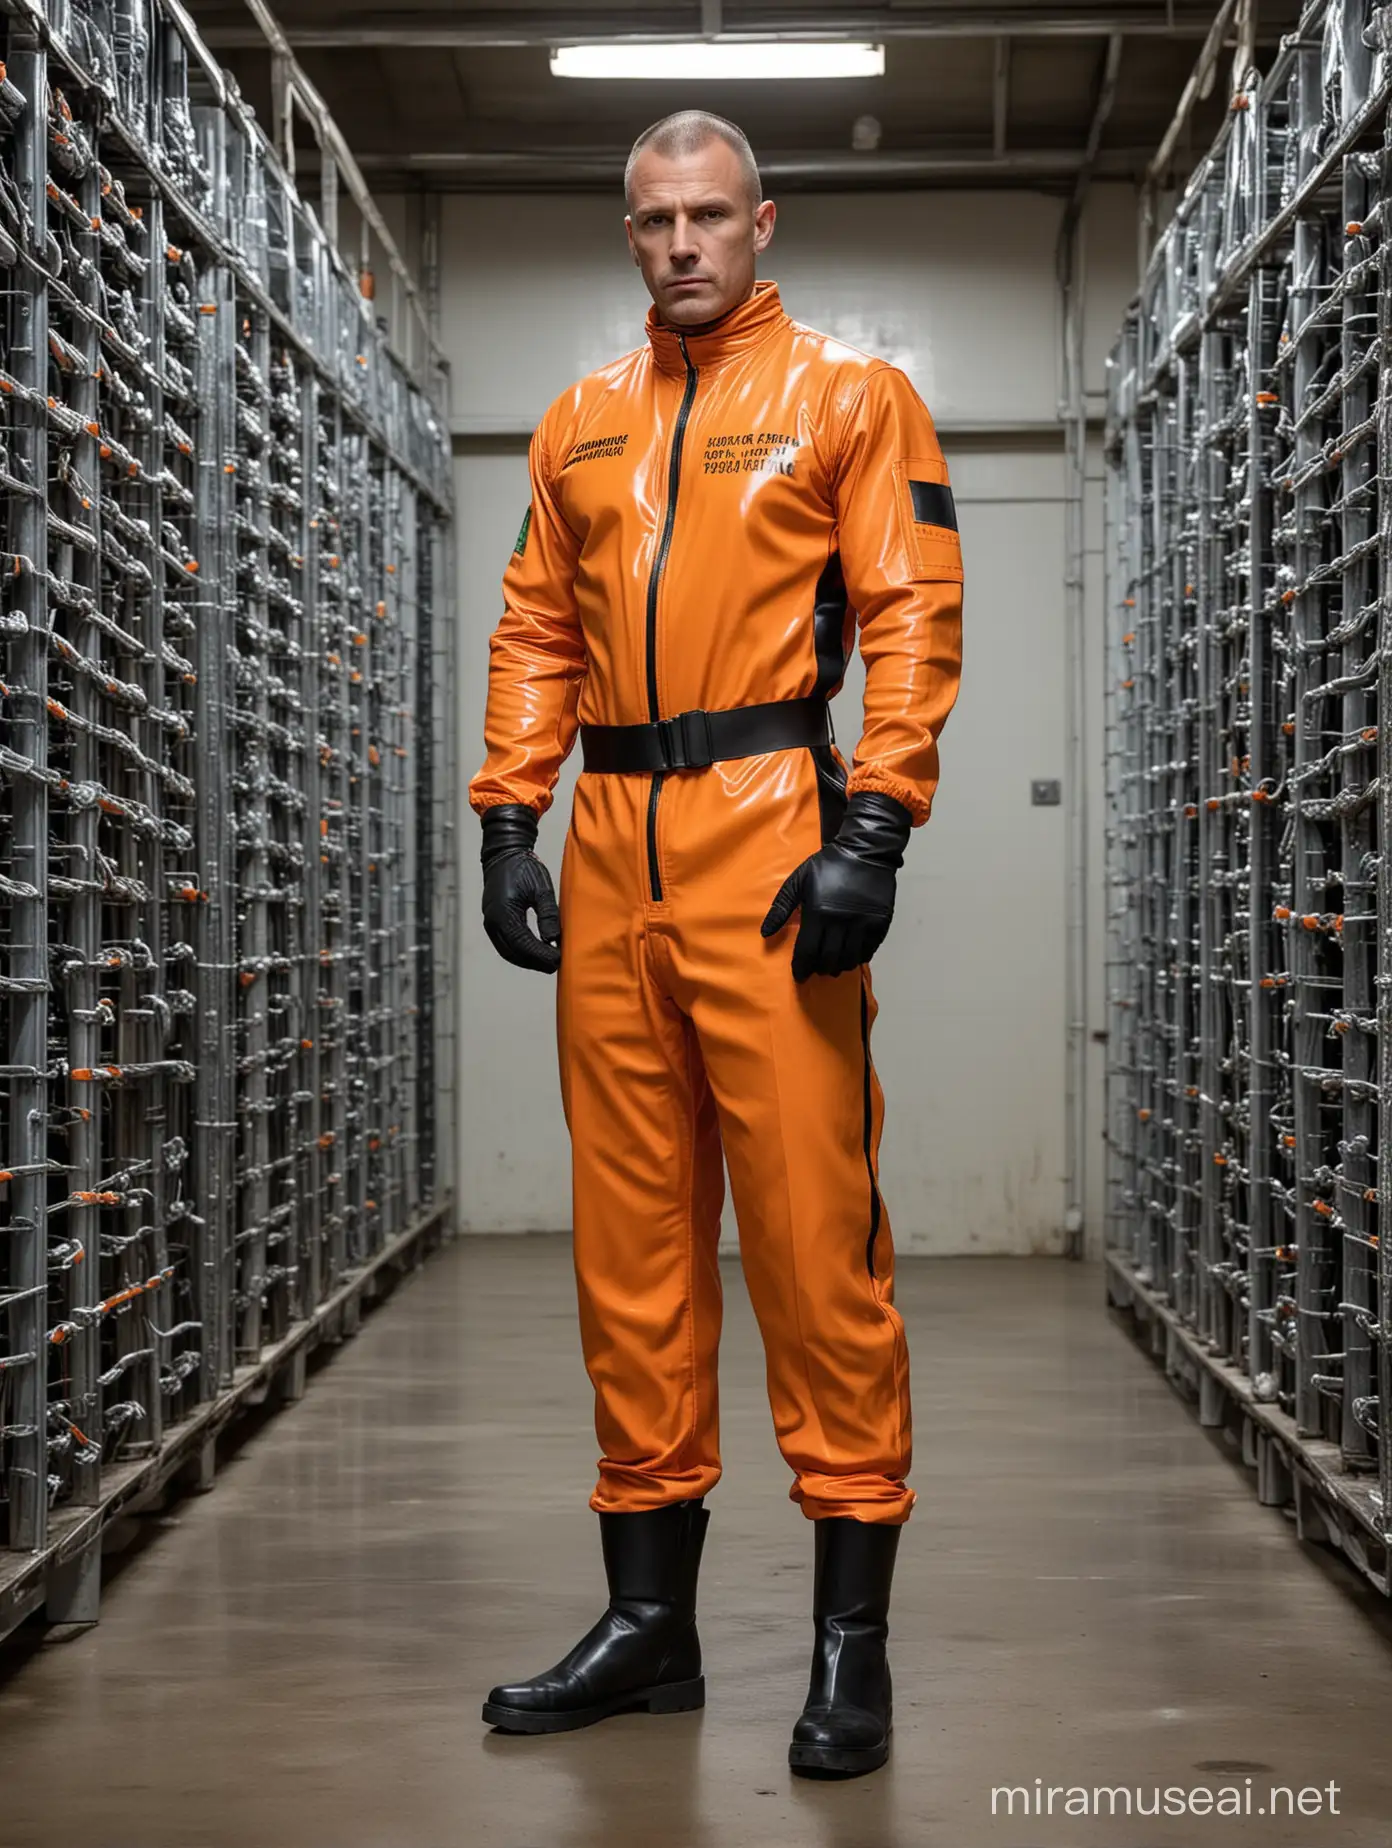 Futuristic Prison Guard Outfitting Inmate with Orange Jumpsuit in HighTech Warehouse